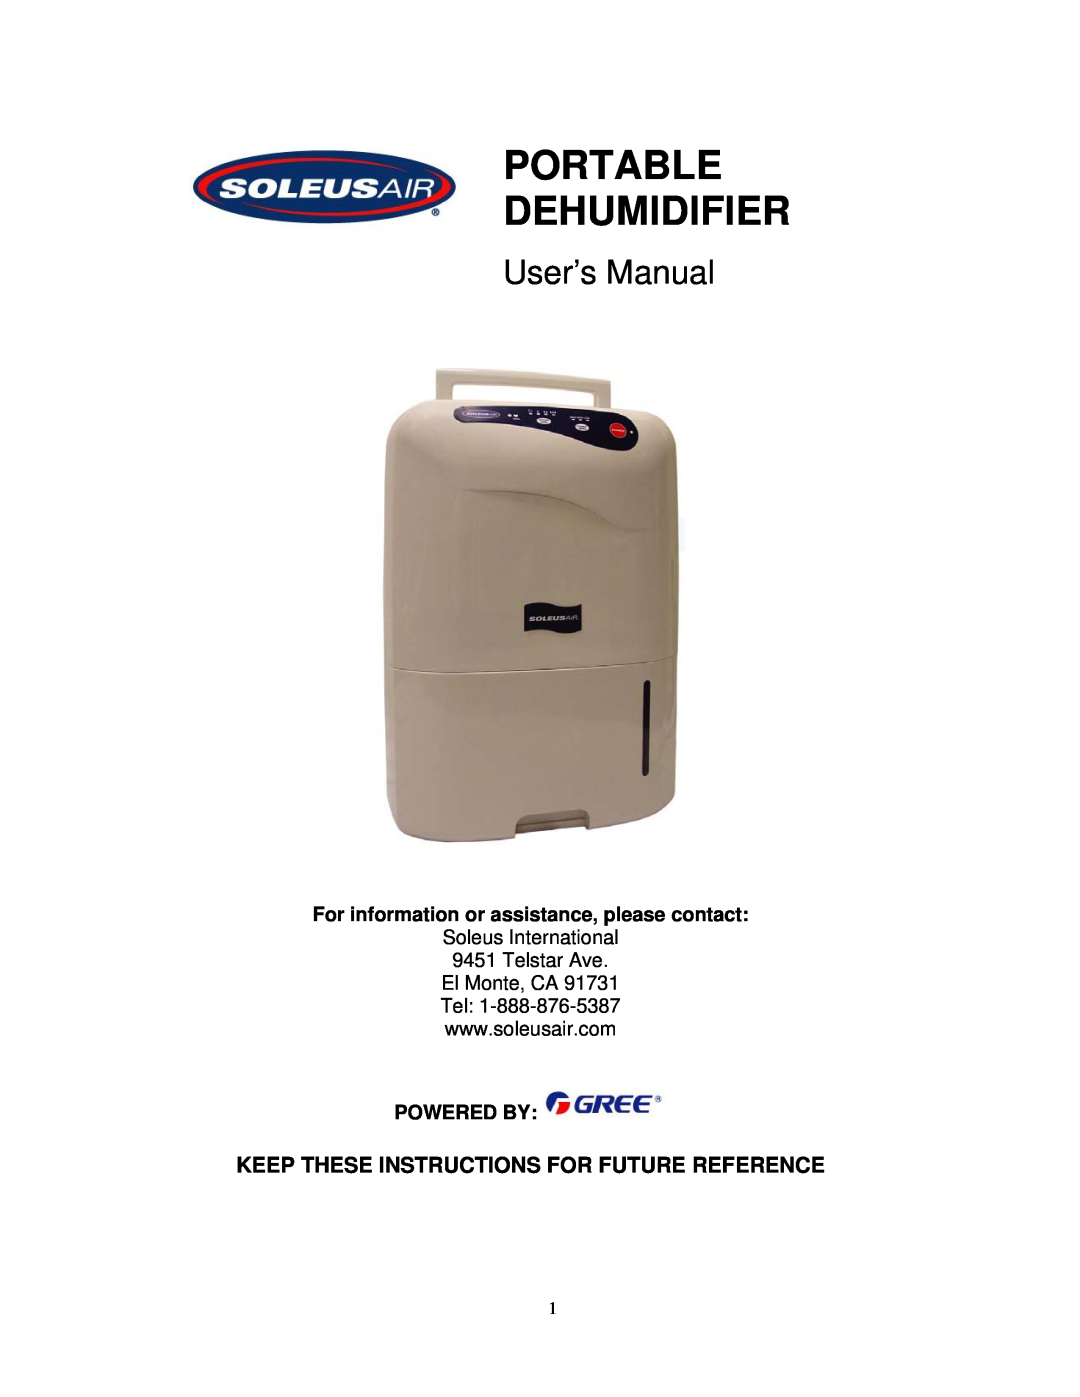 Soleus Air PORTABLE DEHUMIDIFIER user manual For information or assistance, please contact, Powered By, User’s Manual 